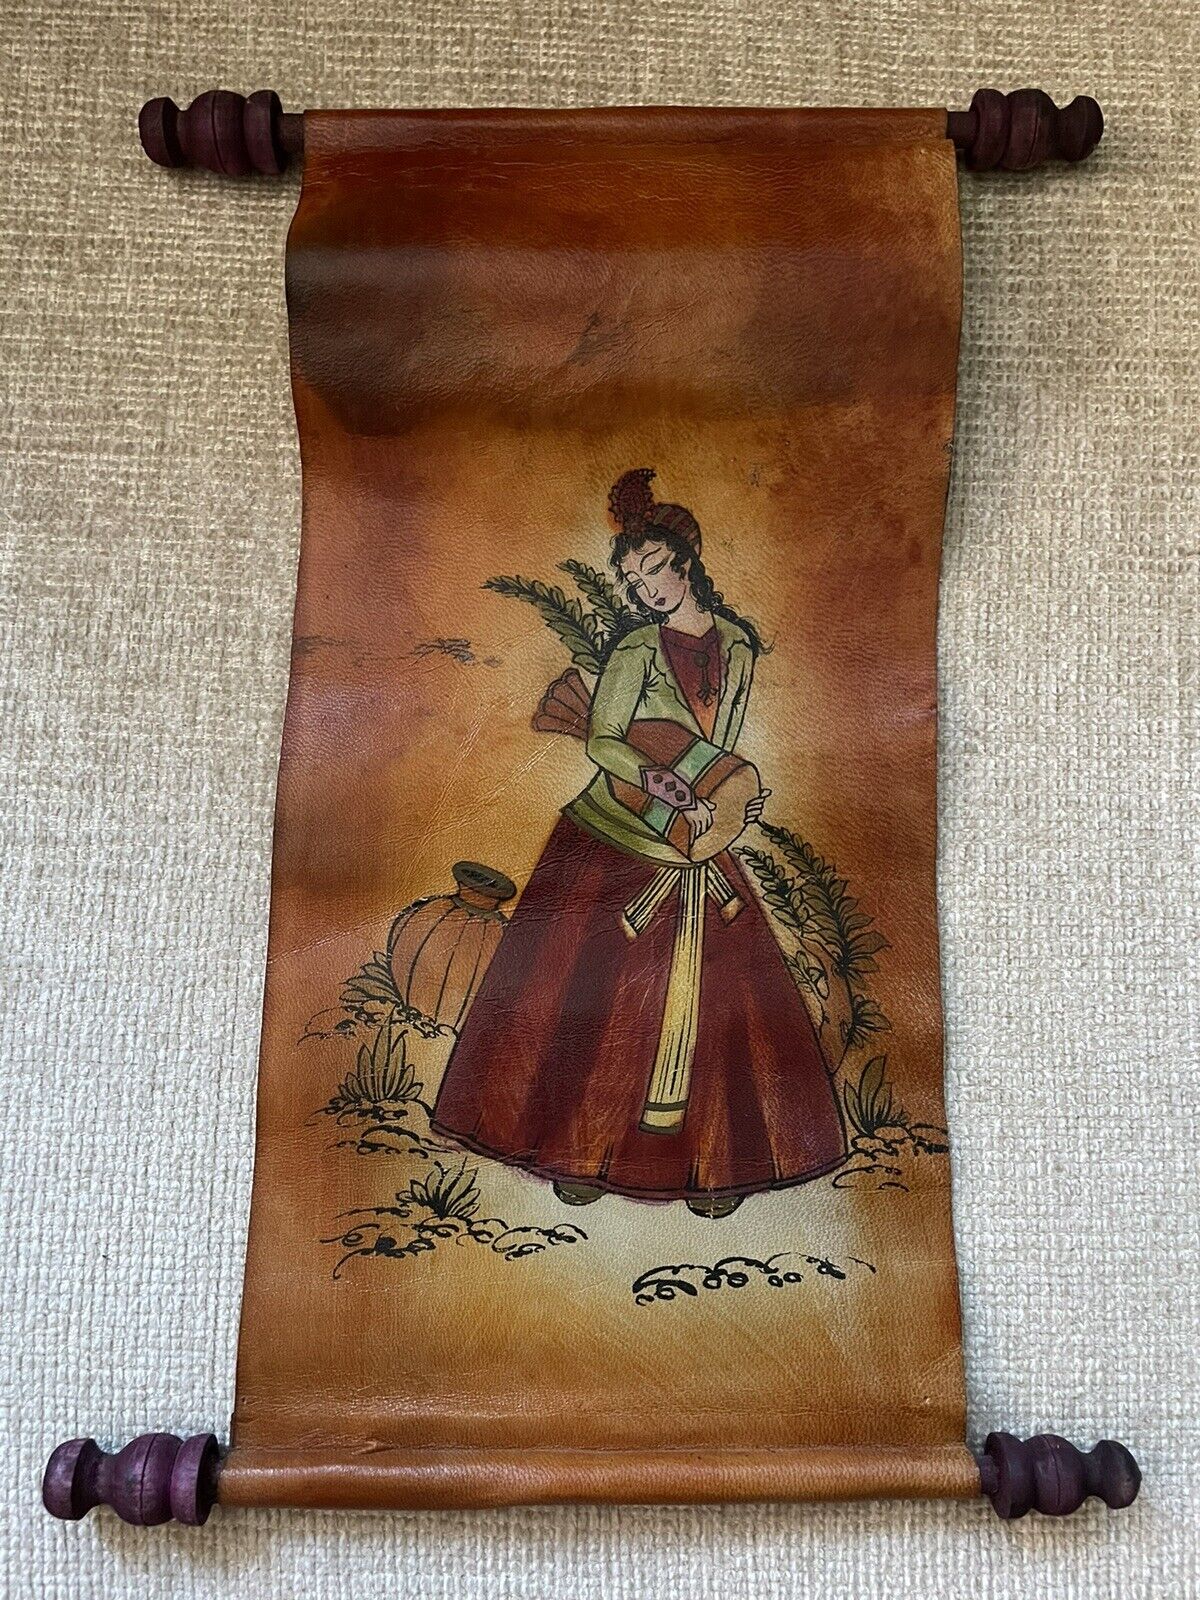 Persian Woman in Red and Green Dress on Leather Scroll - Handmade